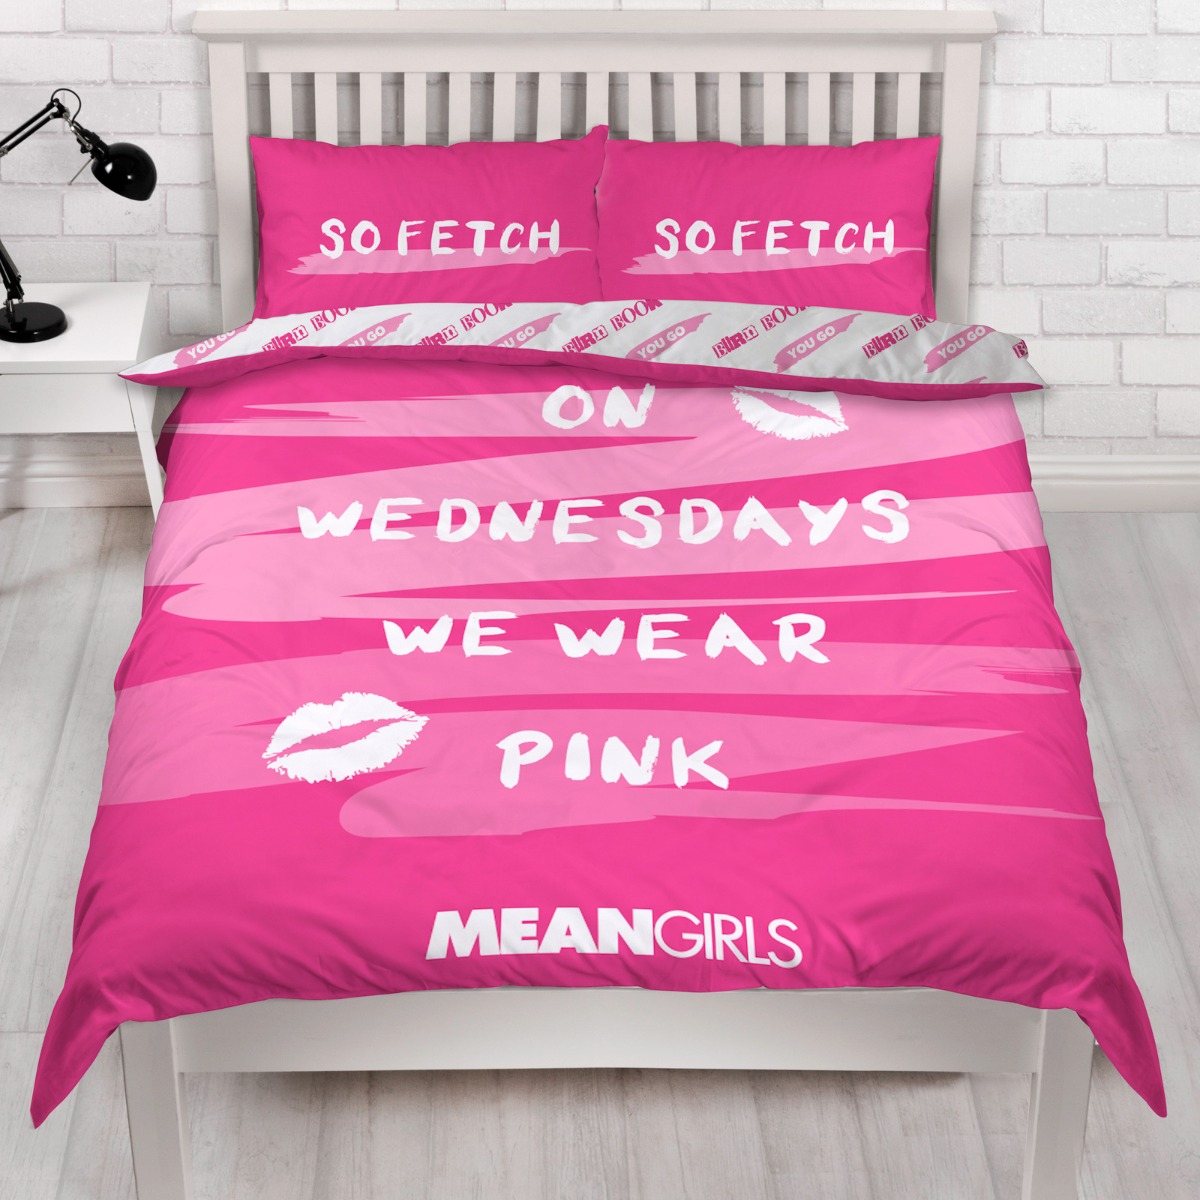 Mean Girls Pink Duvet Cover and Pillowcase Set